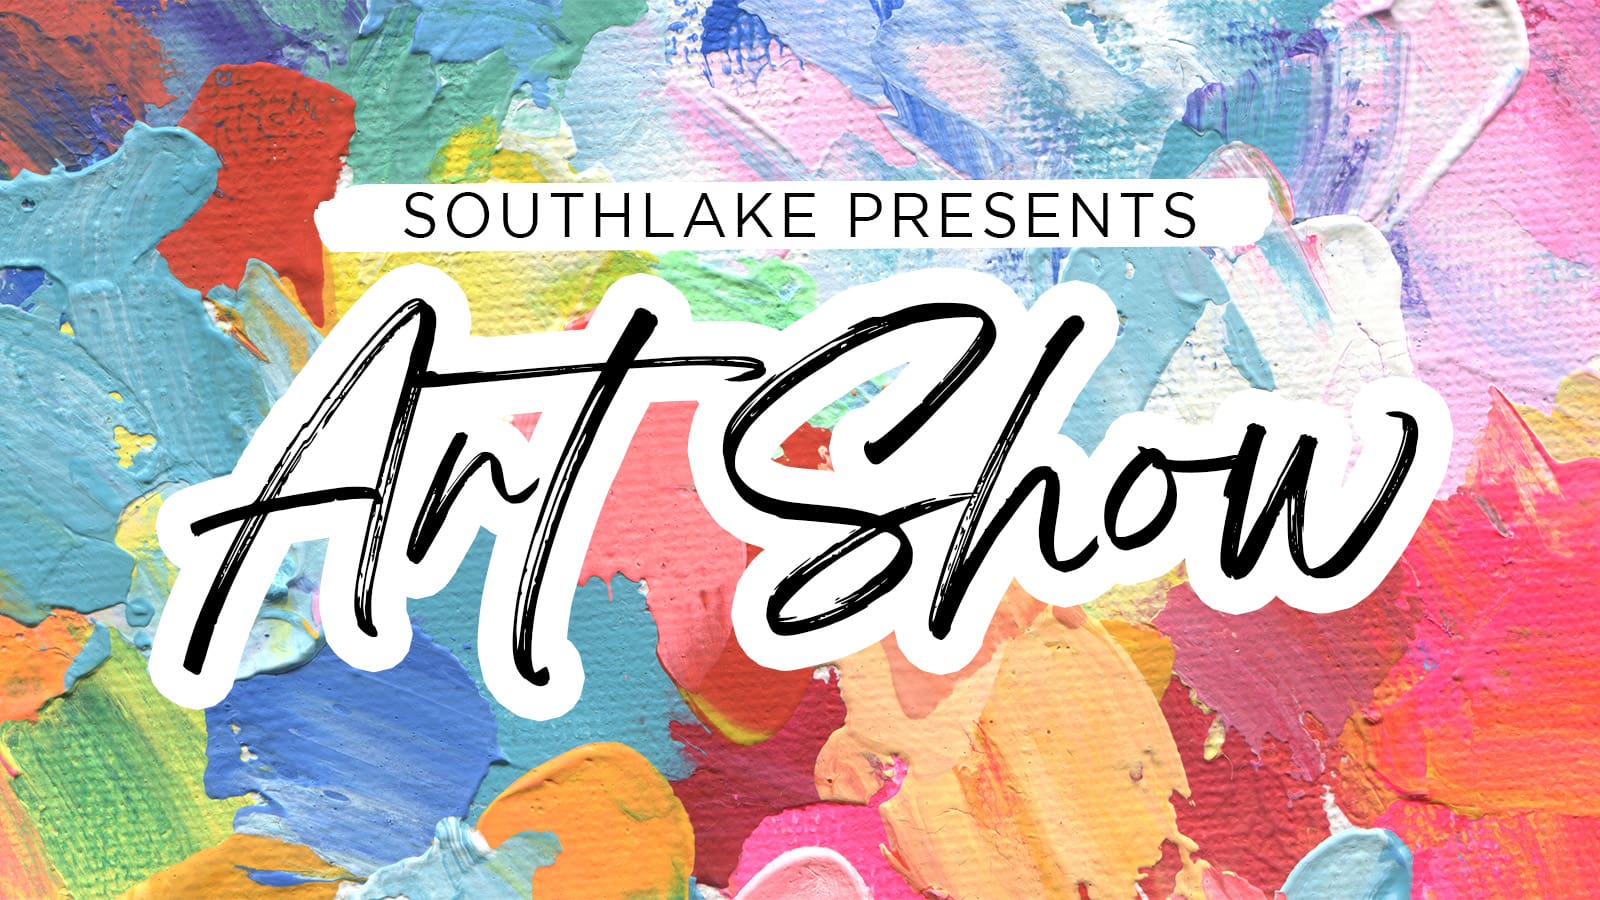 The Southlake Arts Council Seeks Artists for FirstEver Southlake